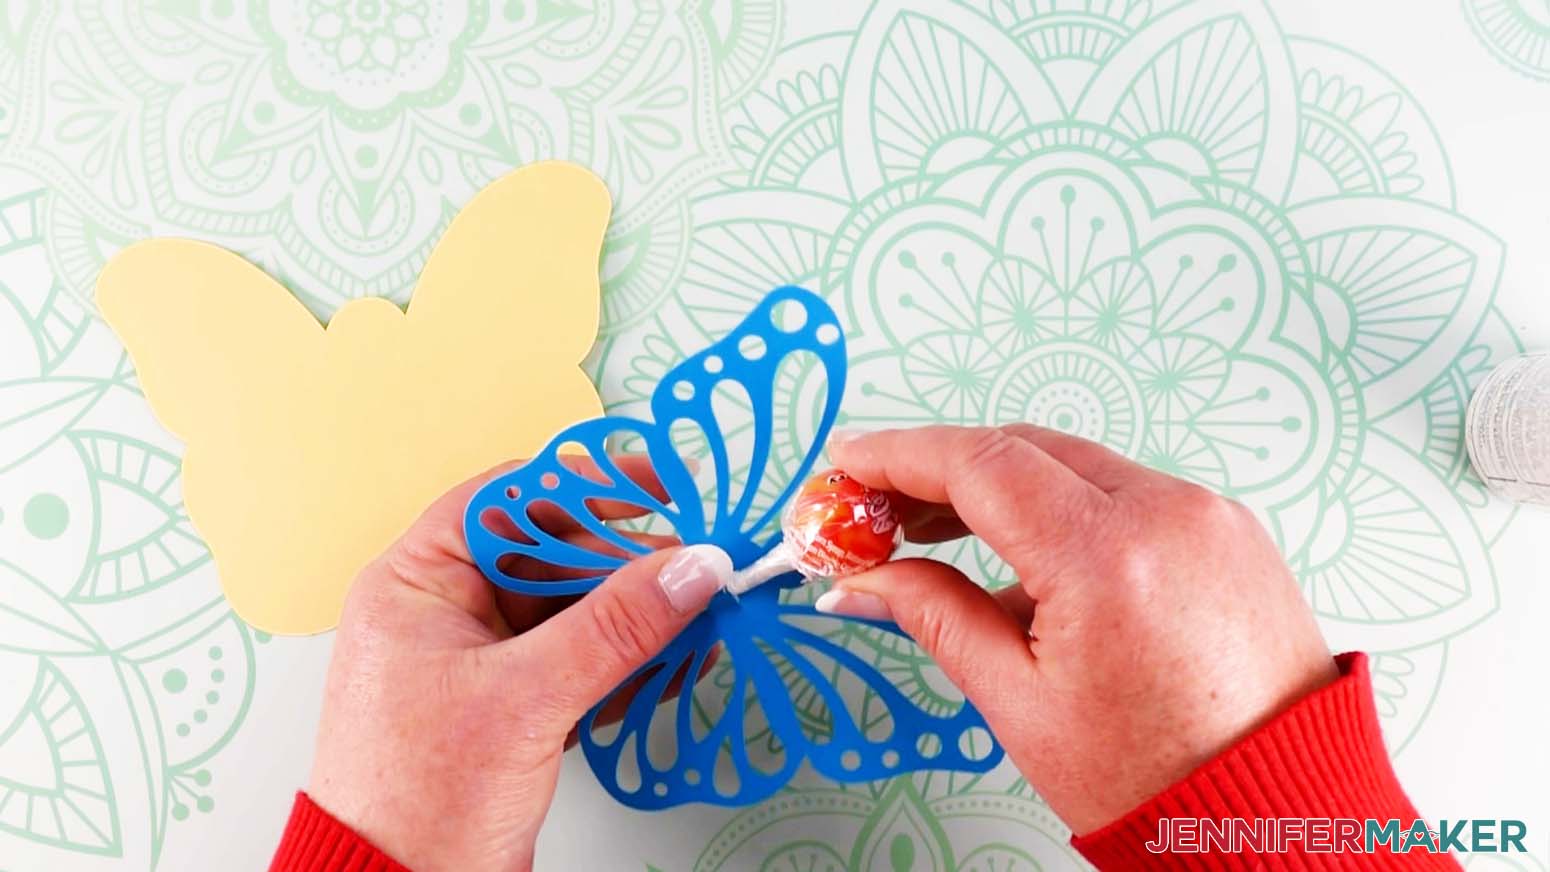 Placing the lollipop stick in the butterfly DIY lollipop holder slit to curve the paper before glueing the layers together.